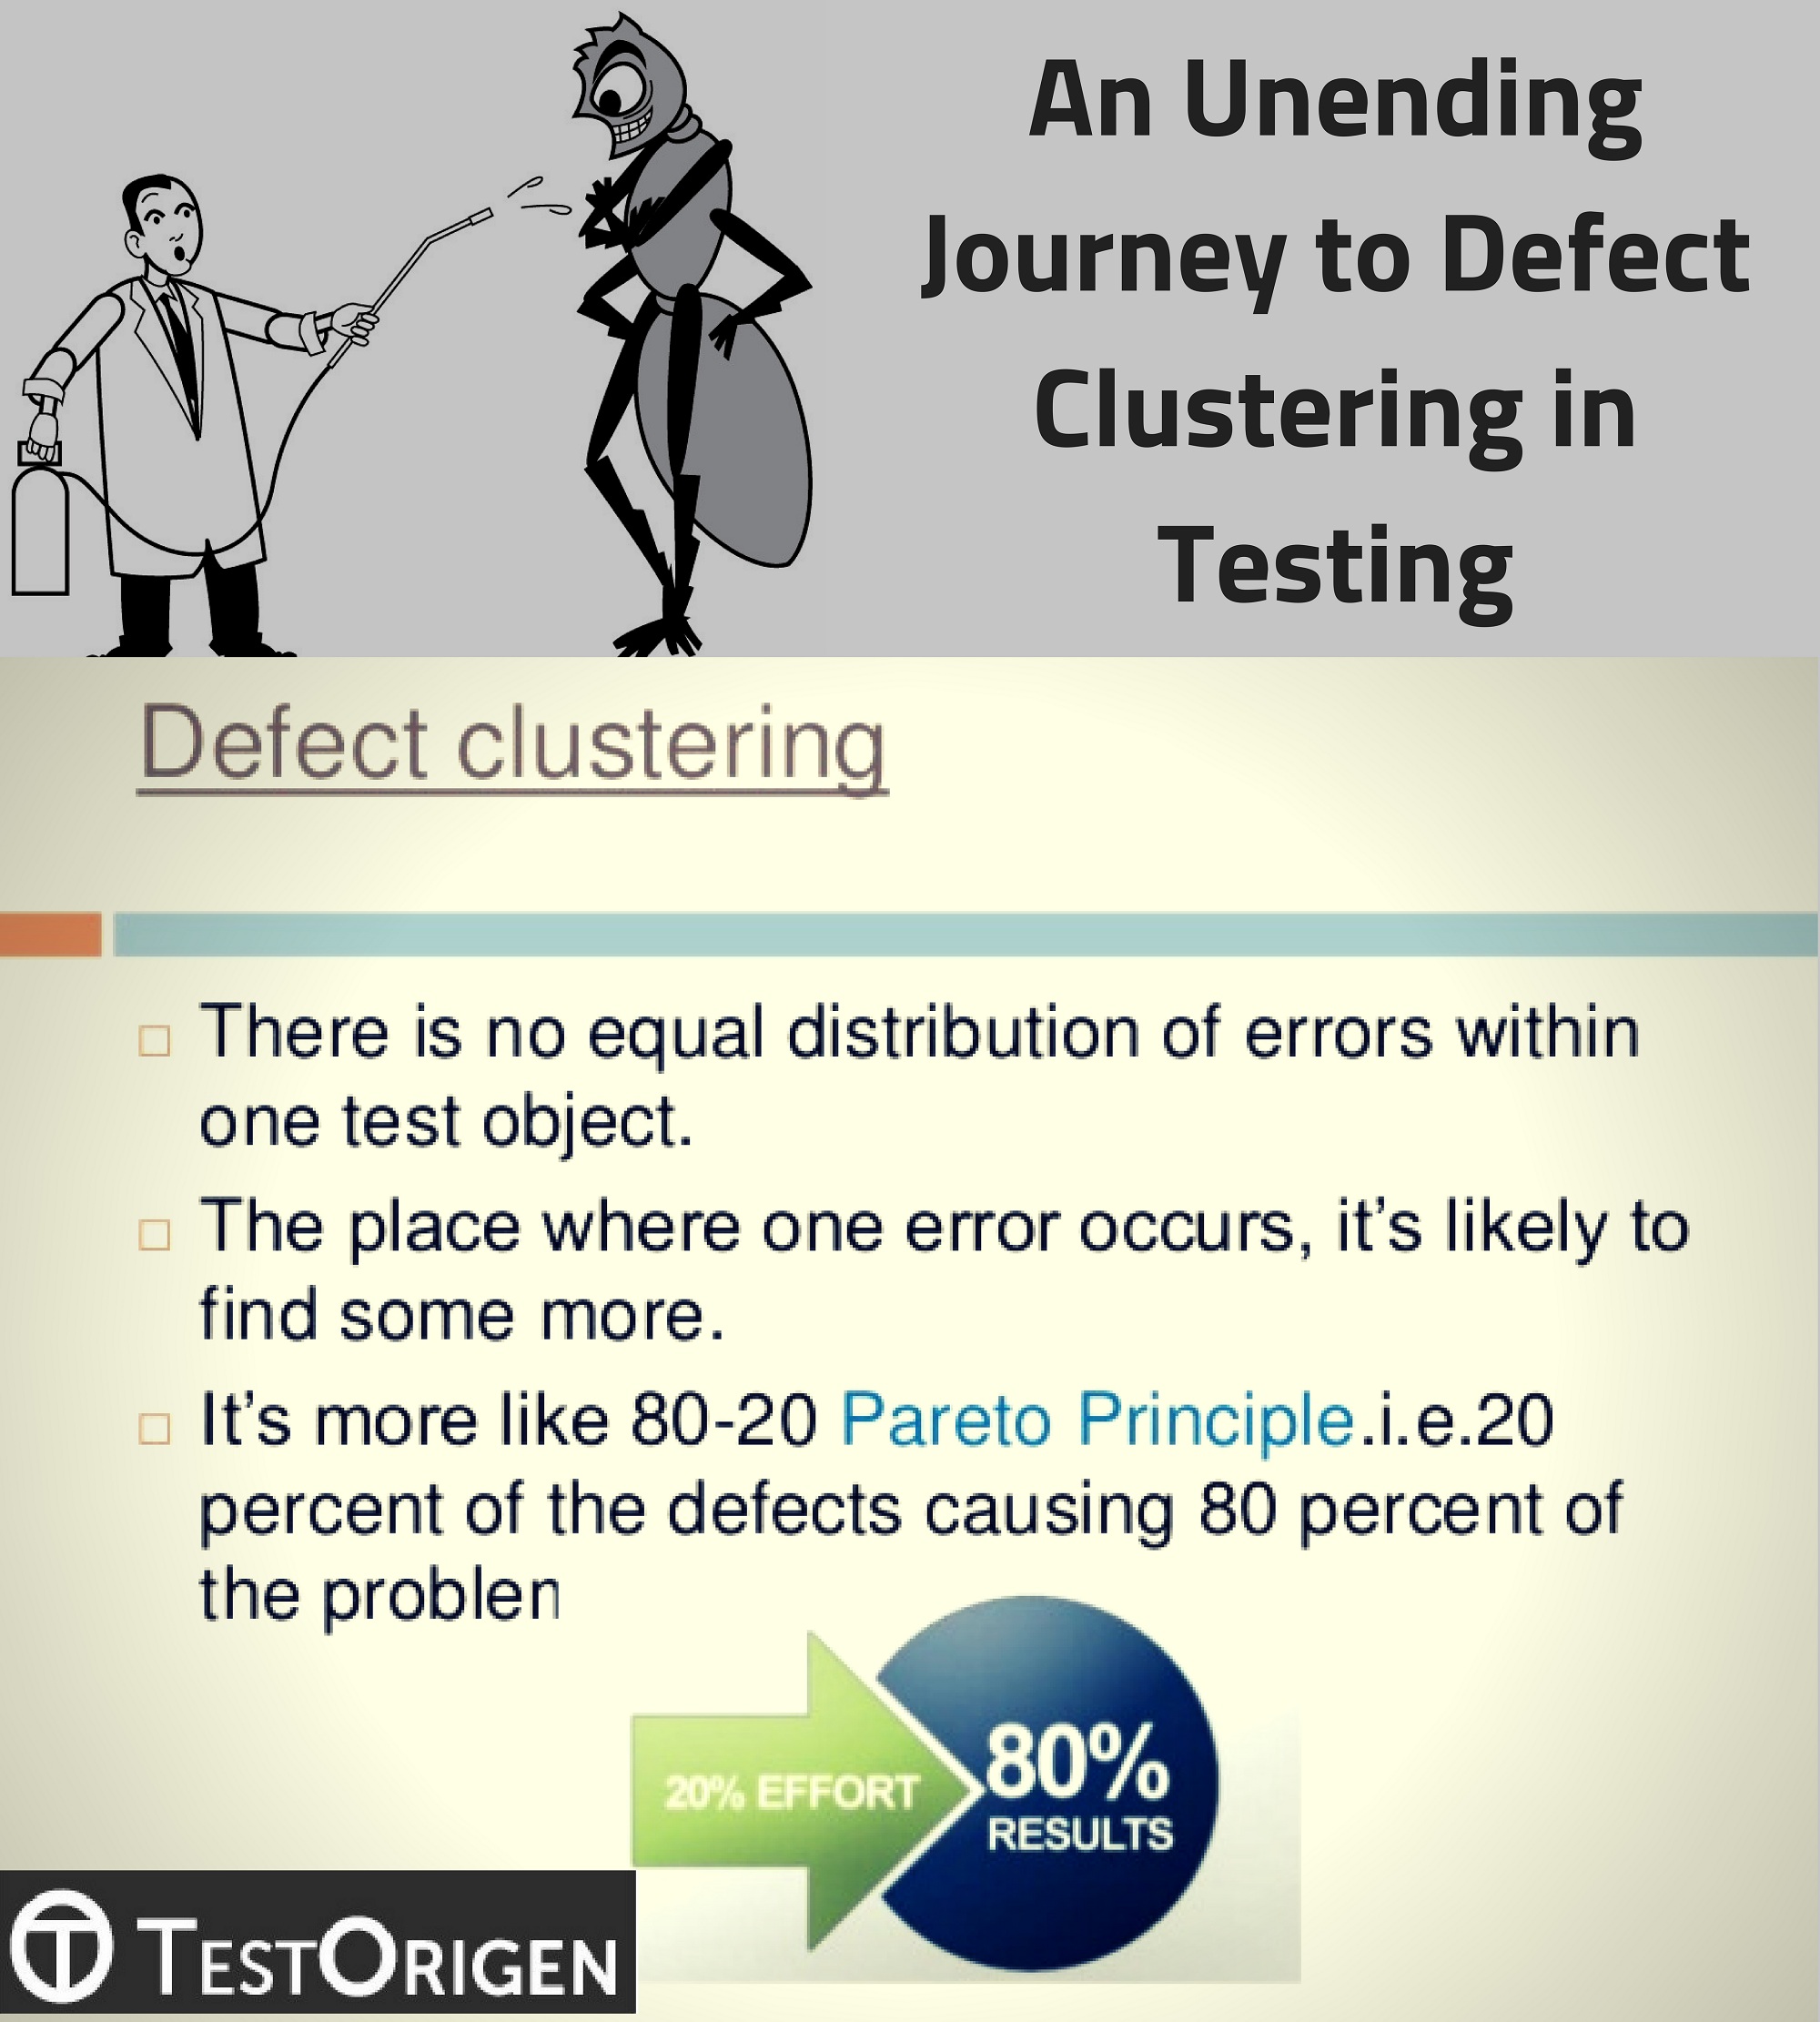 An Unending Journey to Defect Clustering in Testing